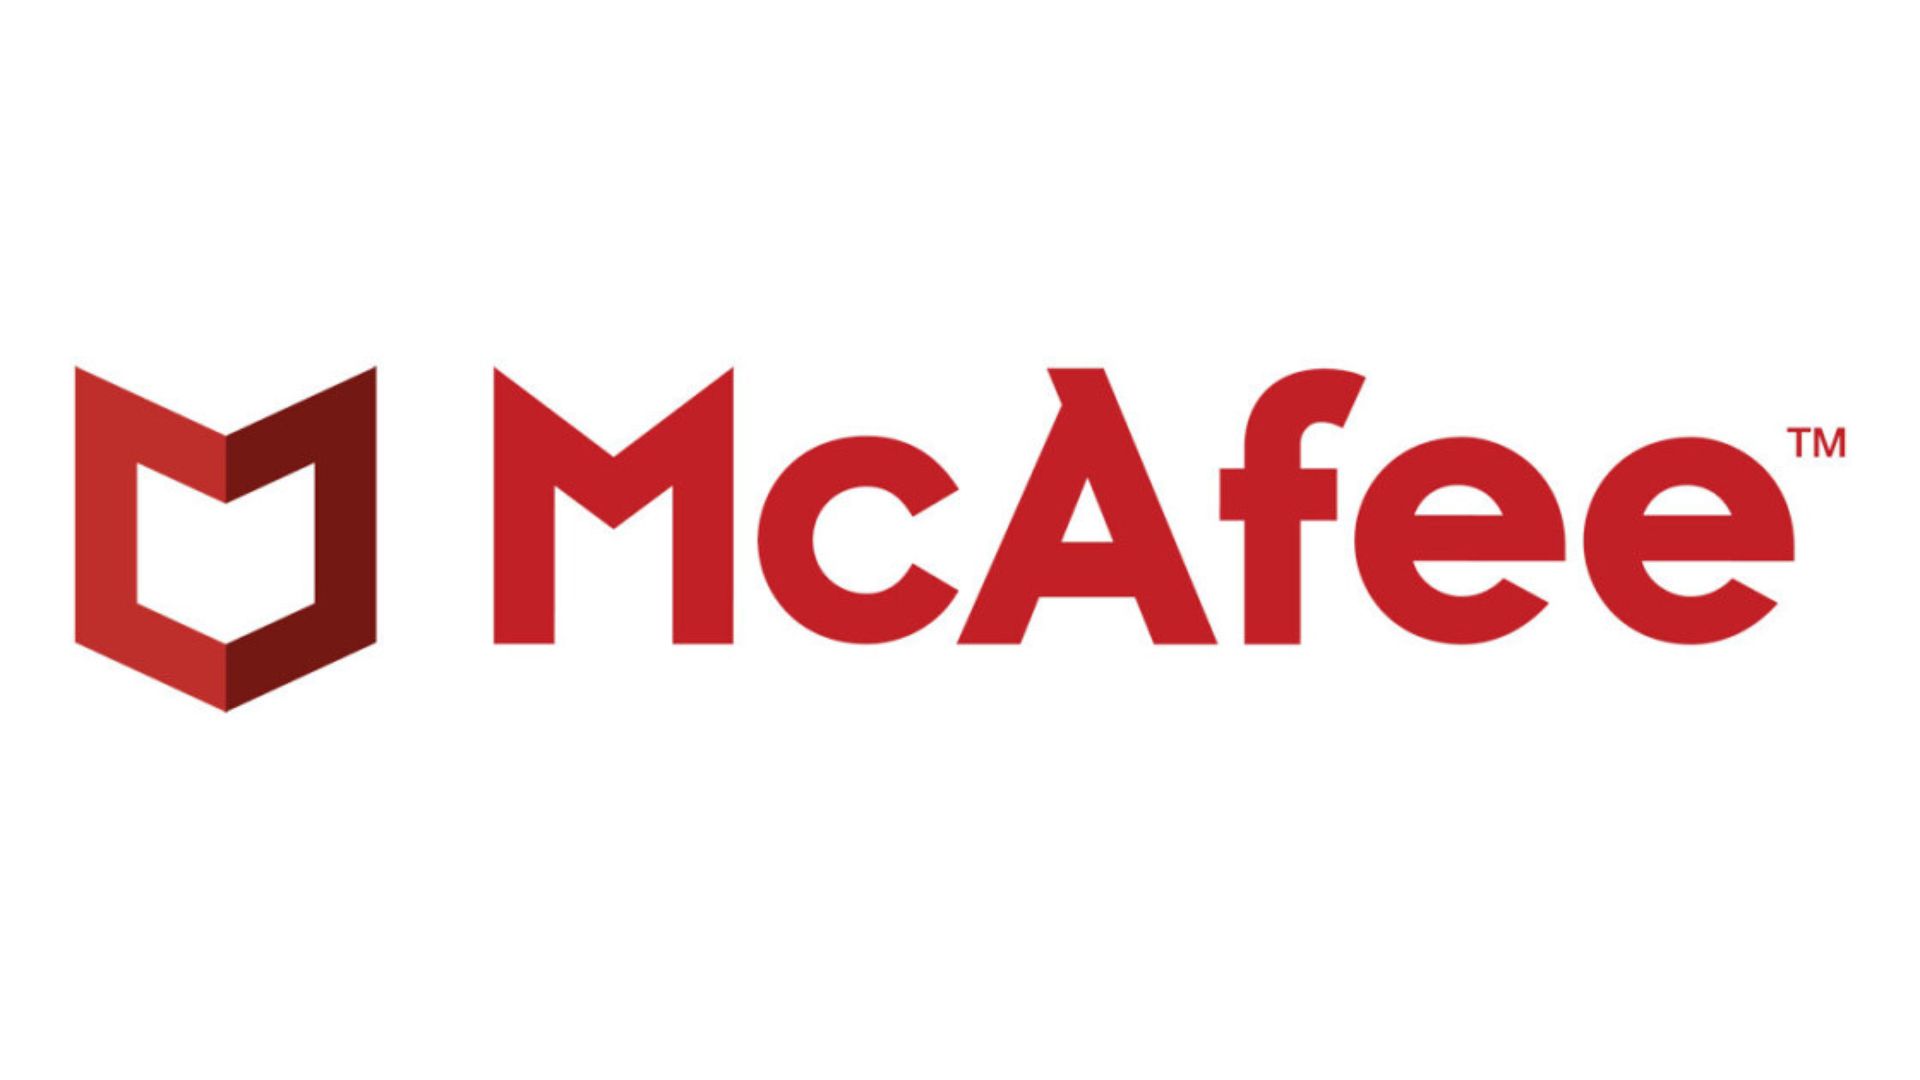 The Logo of McAfee